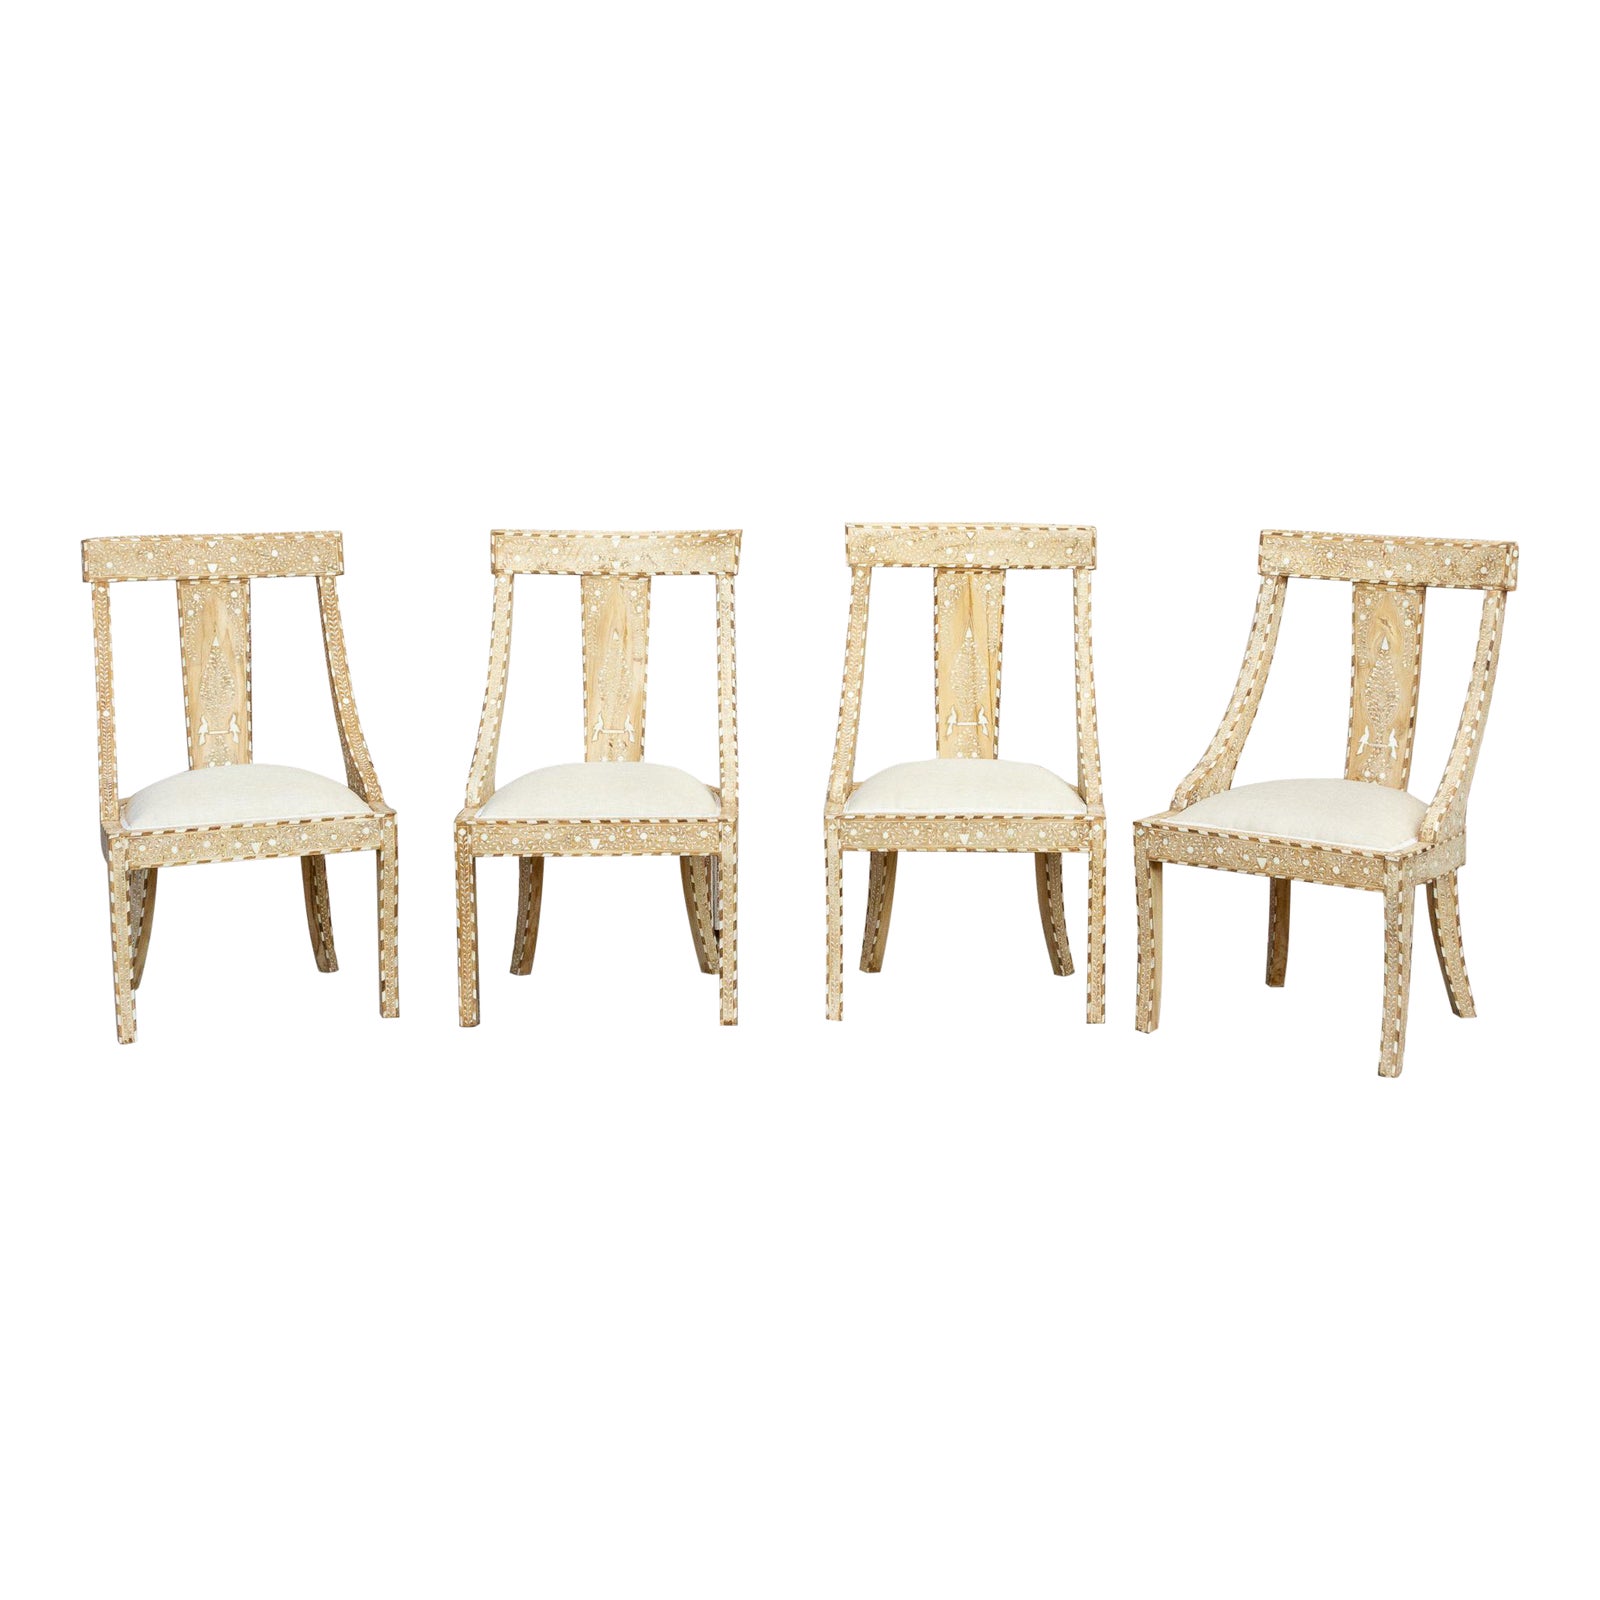 Set of Four, Dutch Colonial Inlay Chairs~P77632115